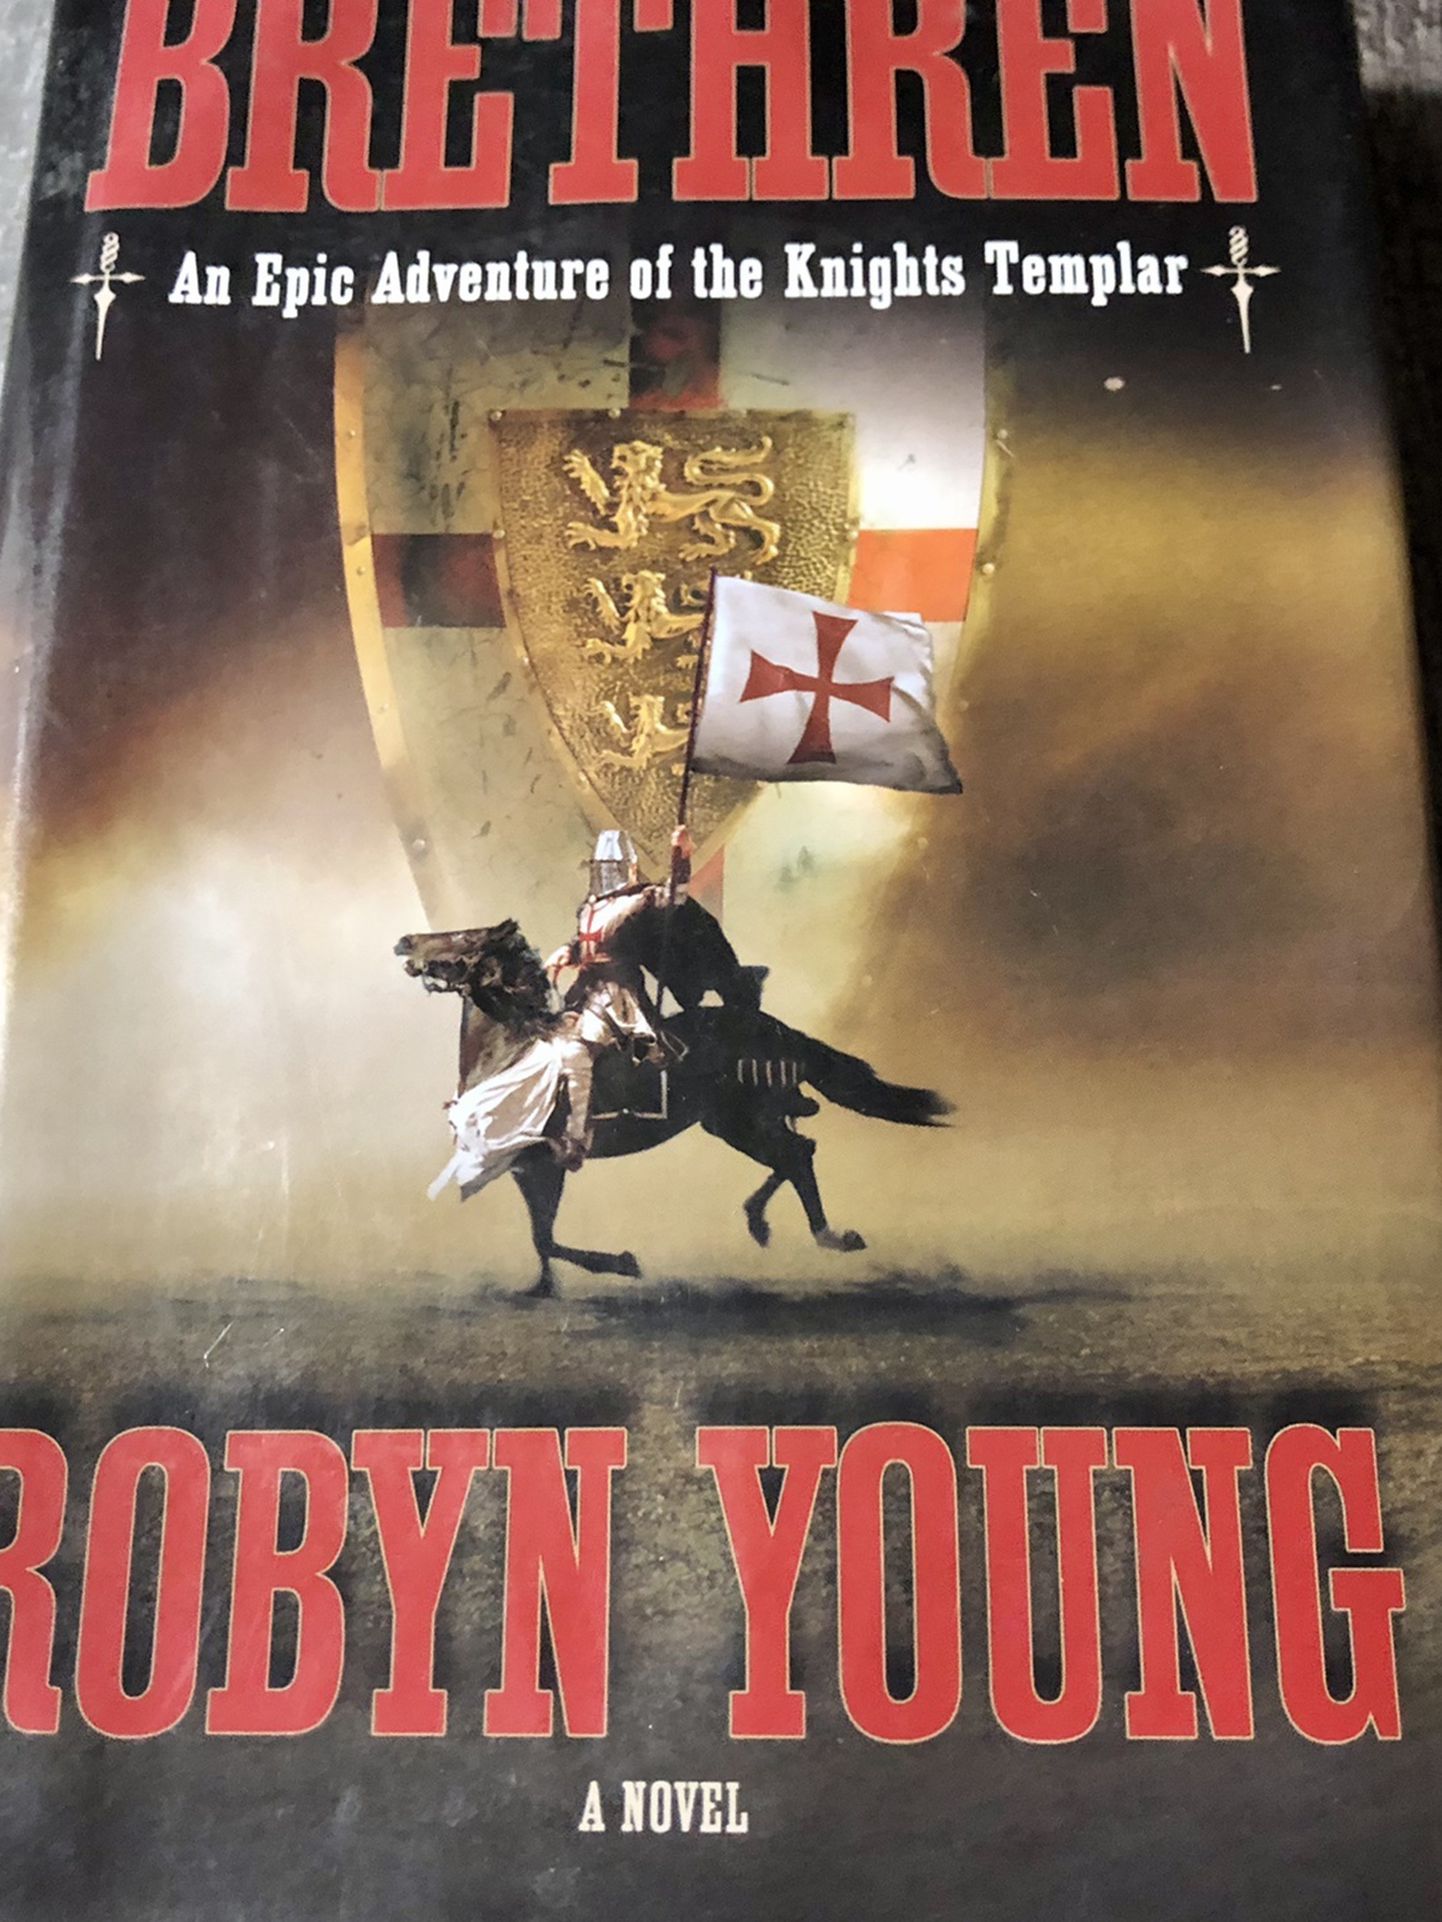 Used Hardcover Book : Brethren: An Epic Adventure of the Knights Templar by Robyn Young